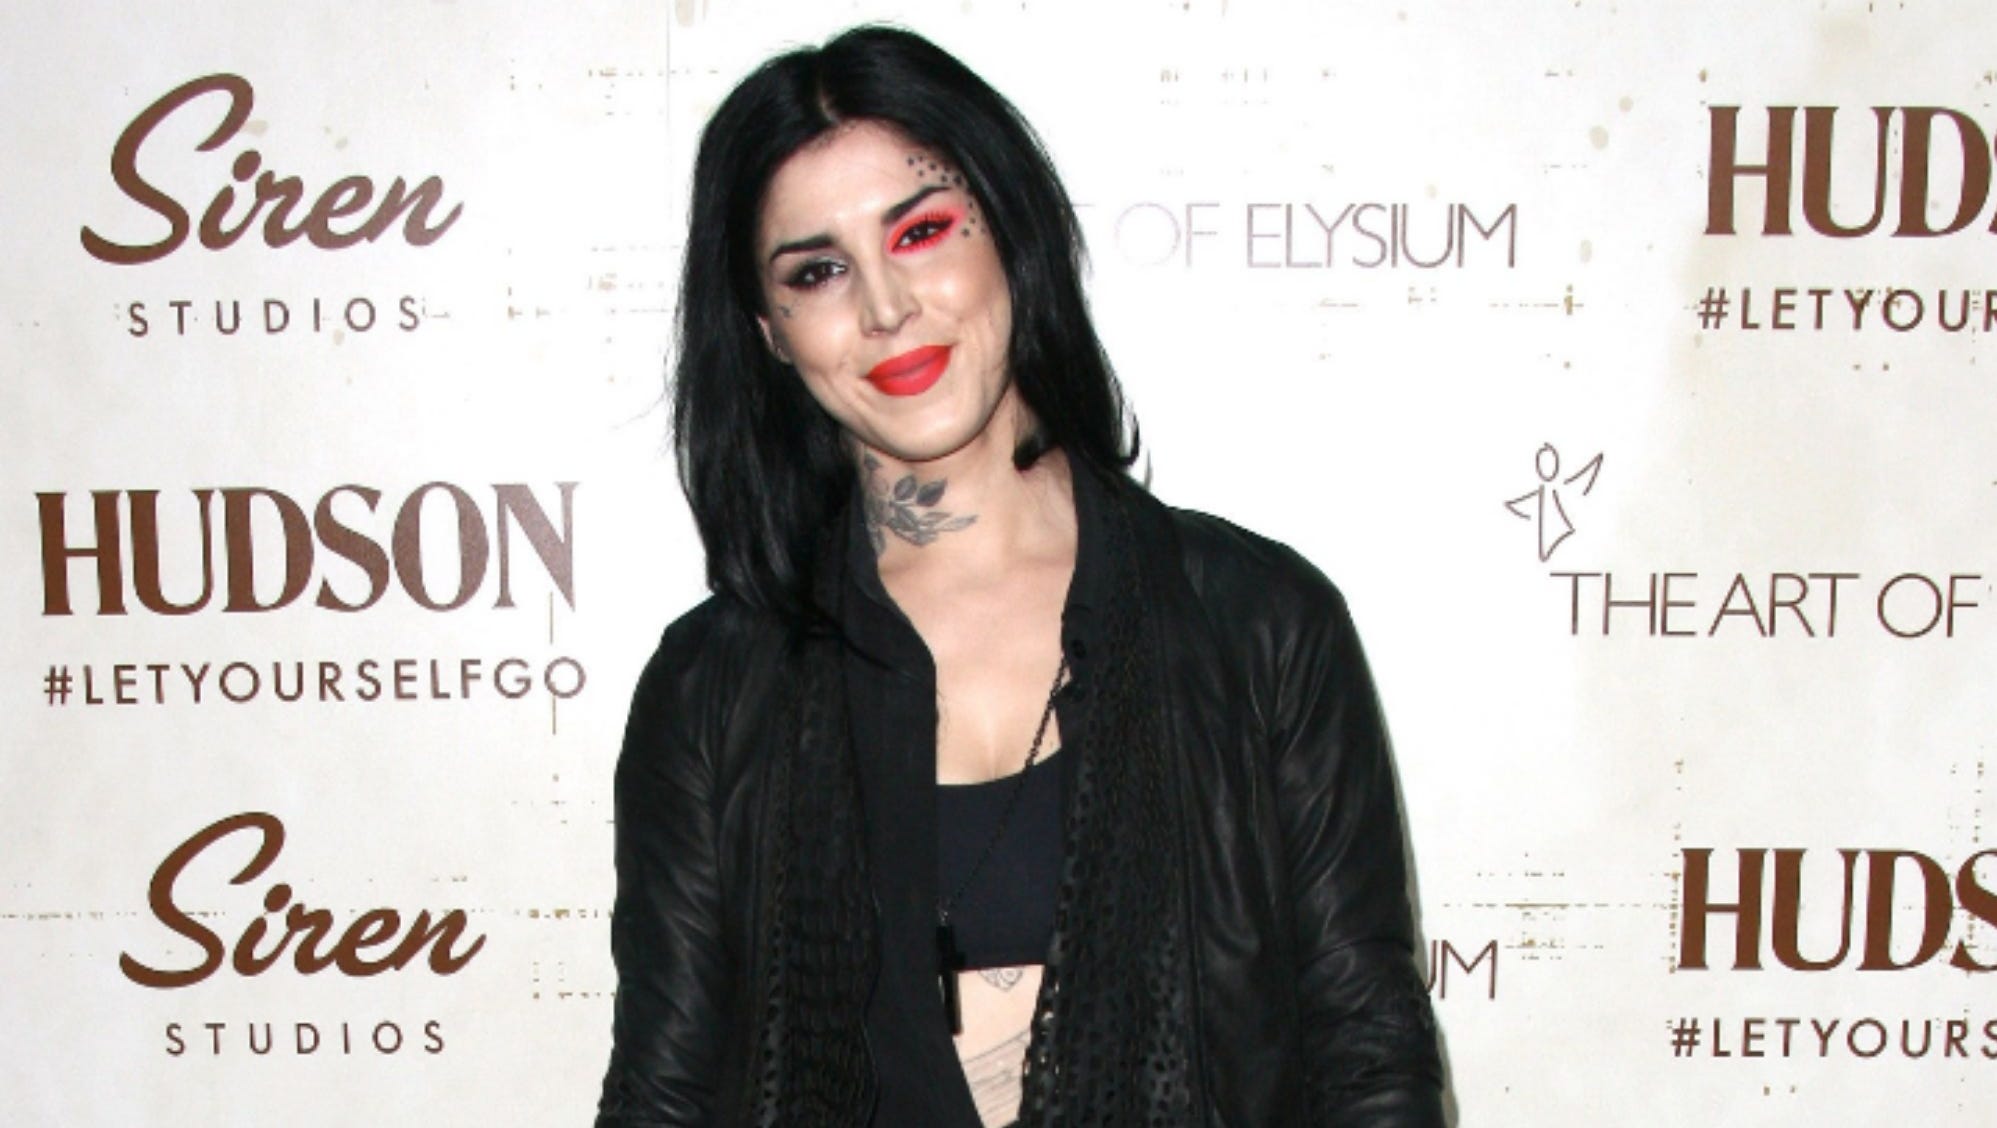 Mom out Kat Von D for post with heartbreaking story